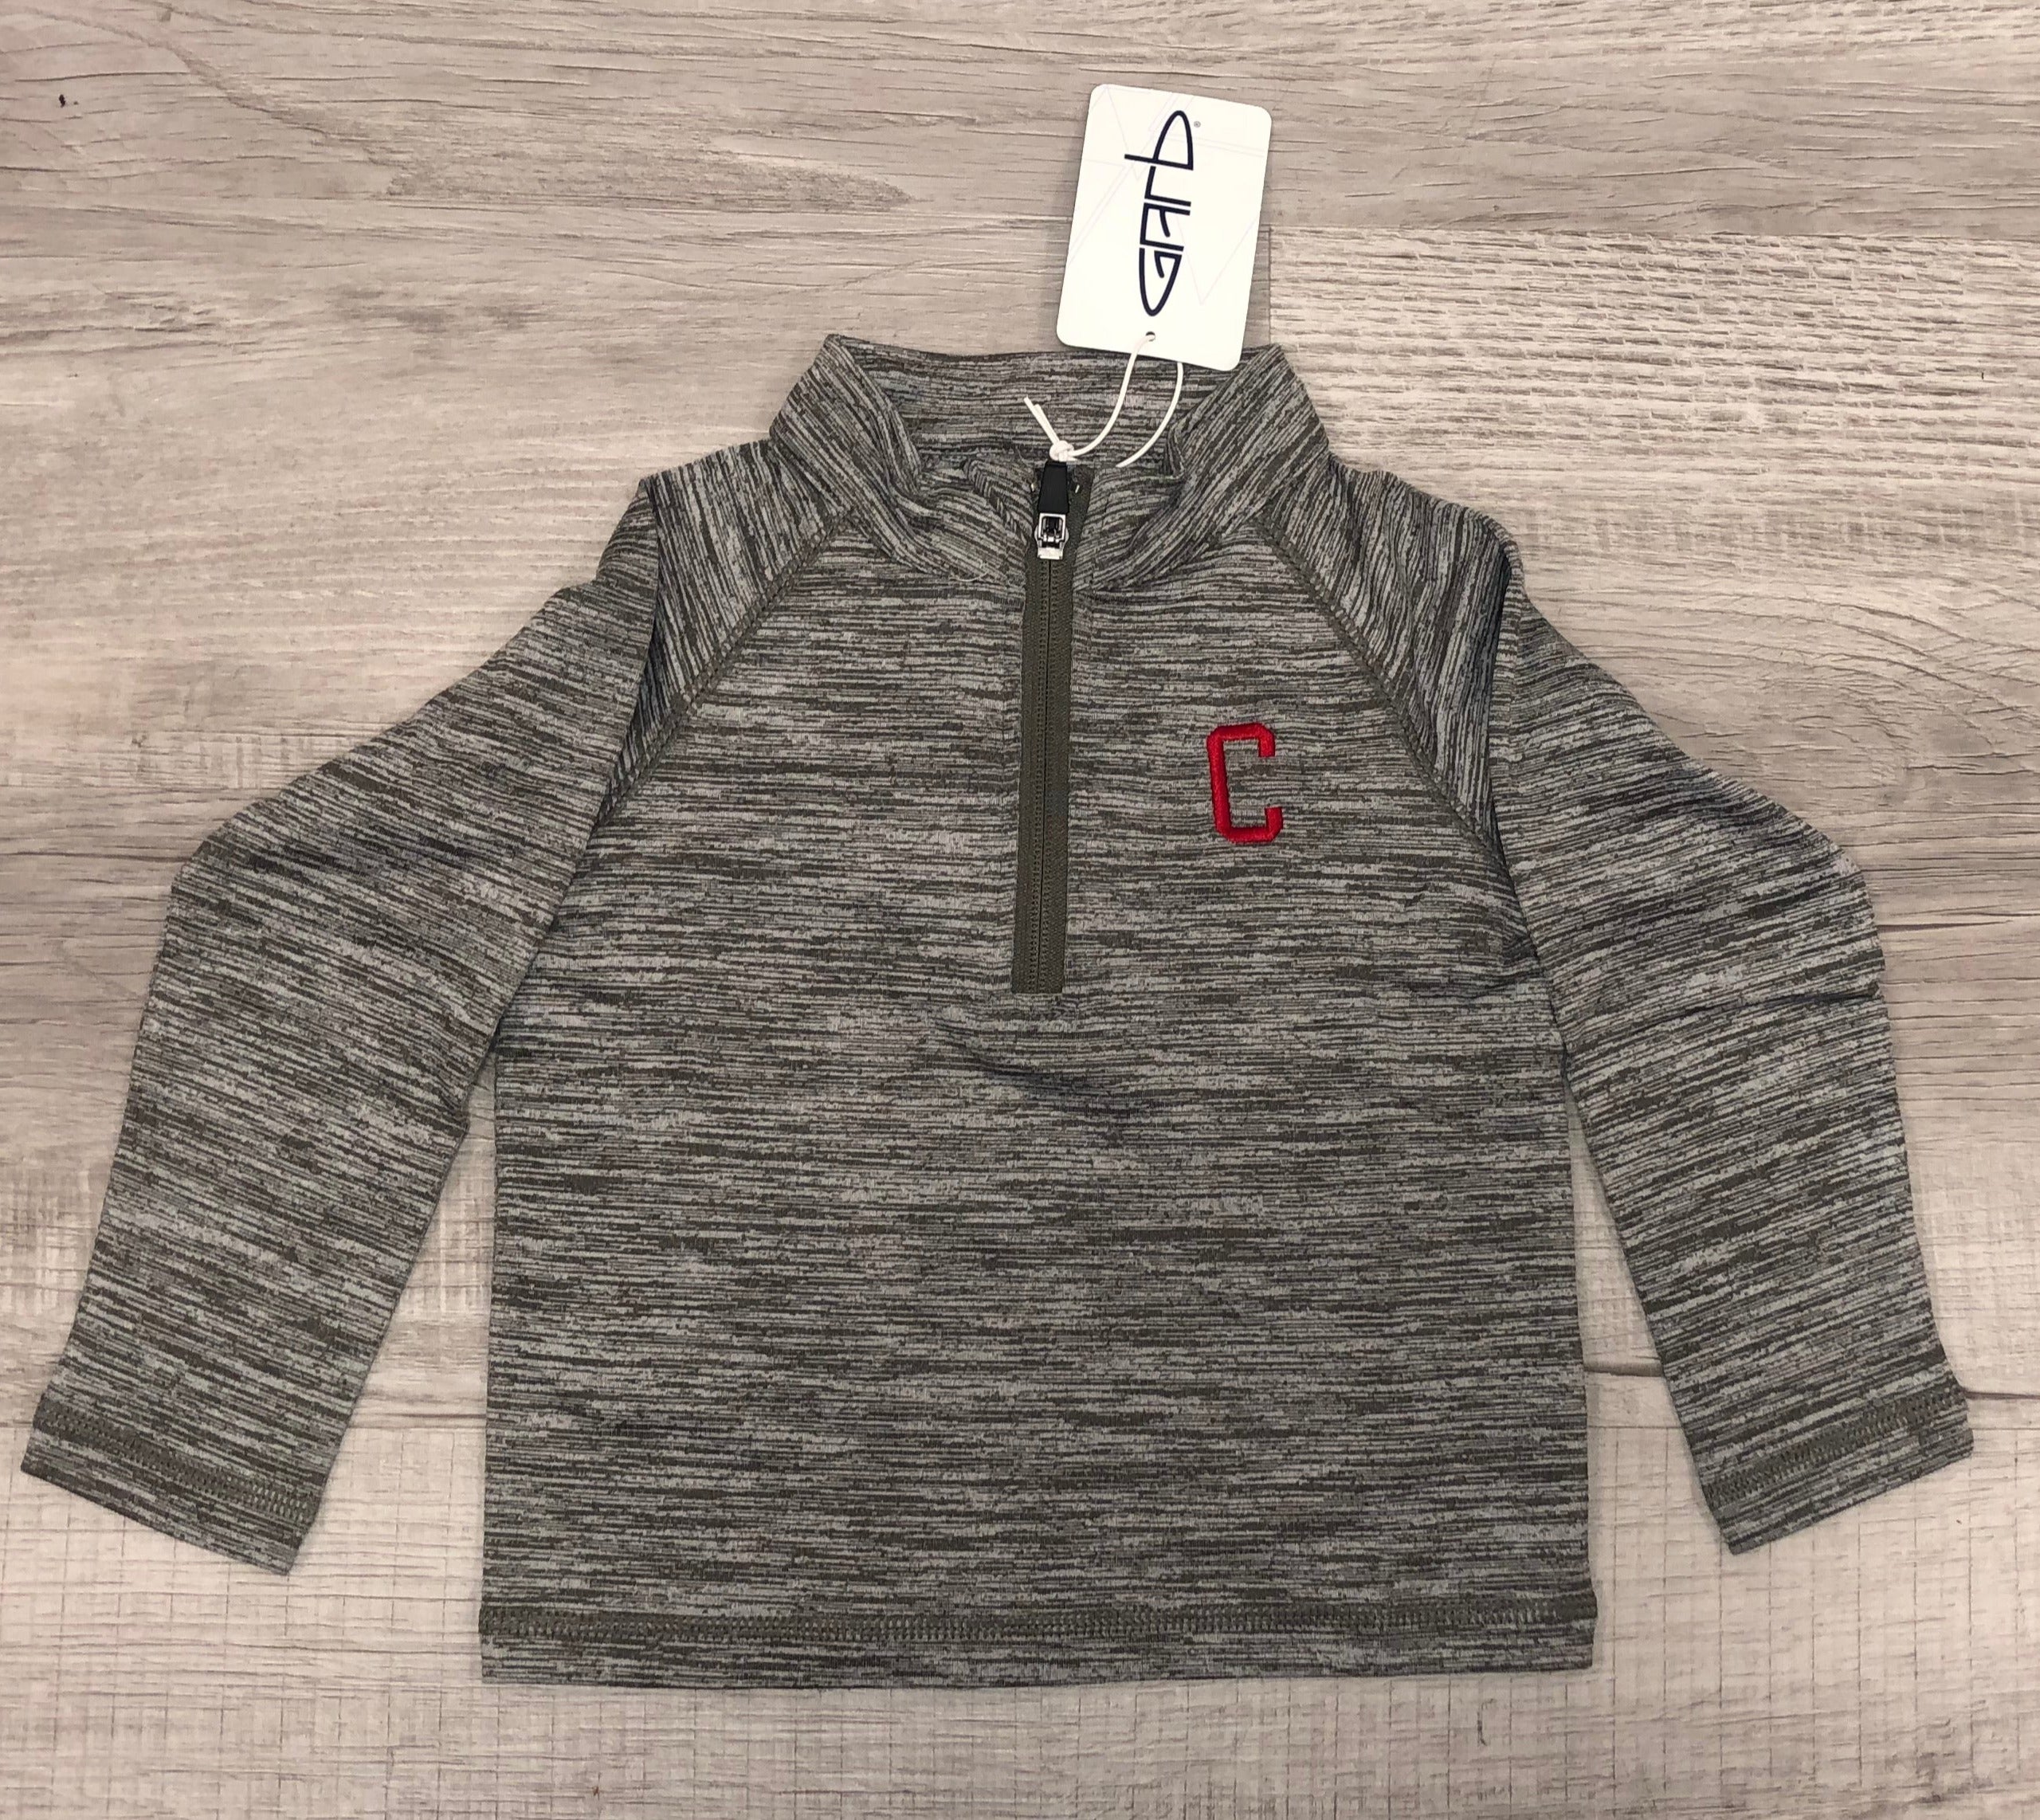 Boys 1/4 Zip with "C" (Toddler/Youth) Grey Heathered